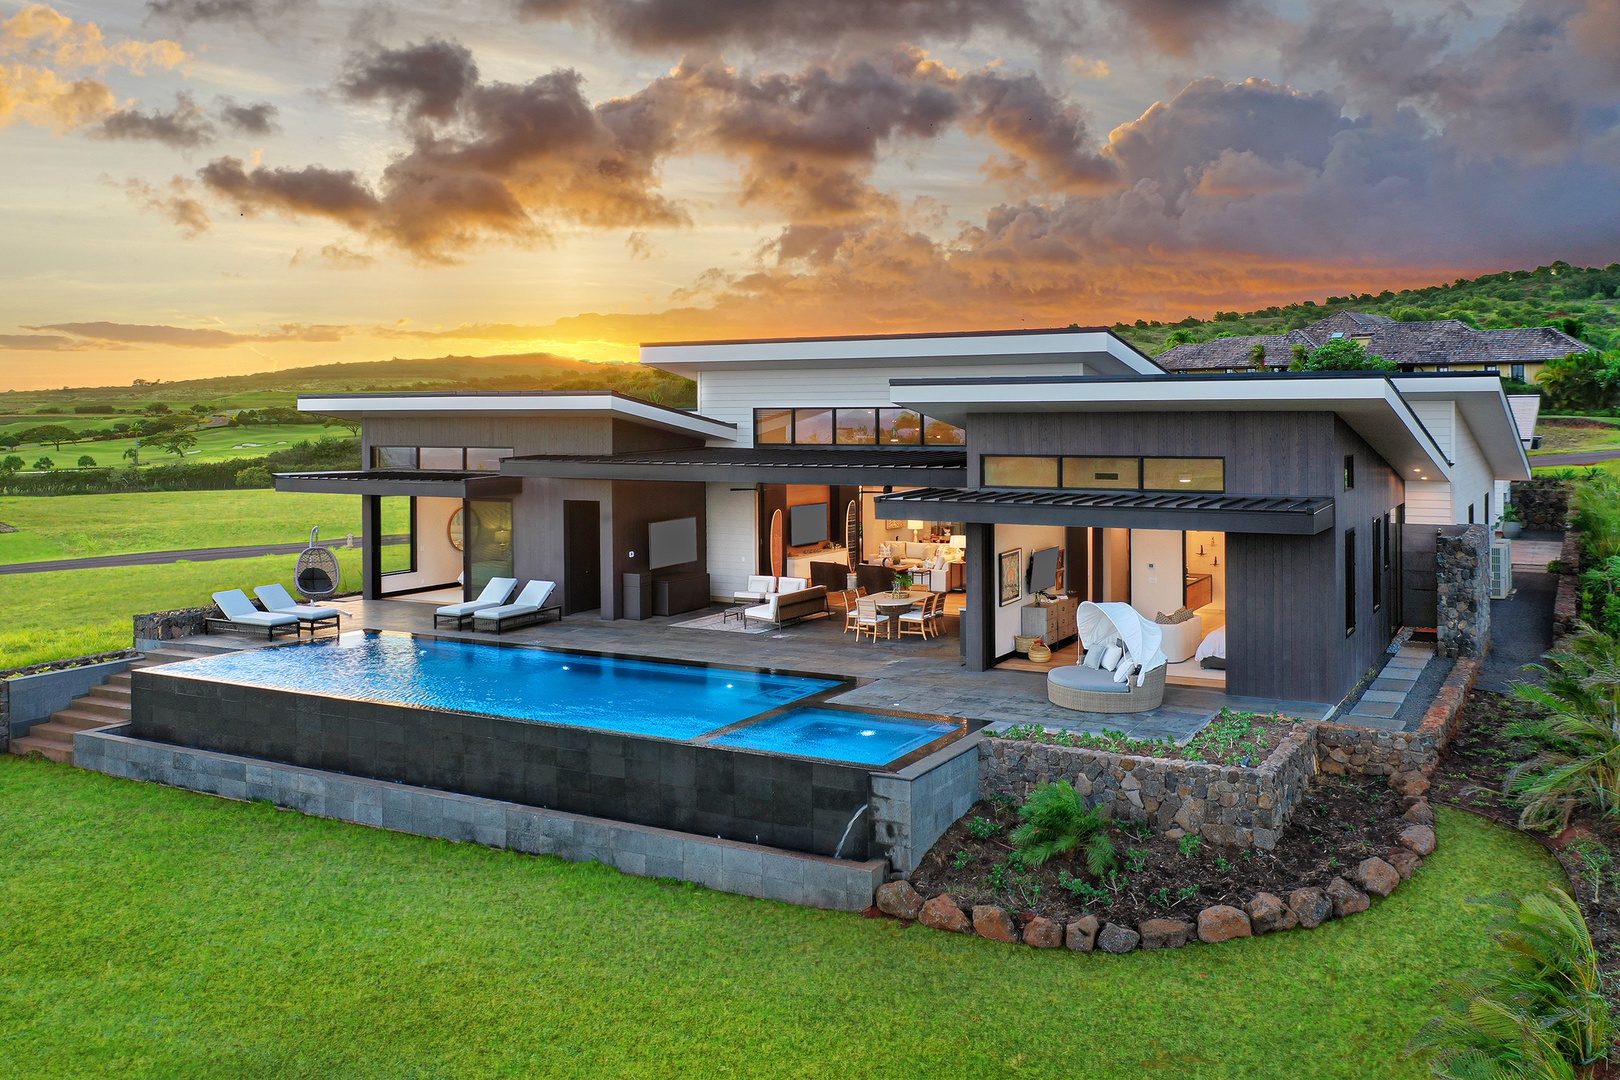 Koloa Vacation Rentals, Hale Mahina Hou - Experience boundless Kauai living with our luxury home's infinite space design. Welcome to your new sanctuary!